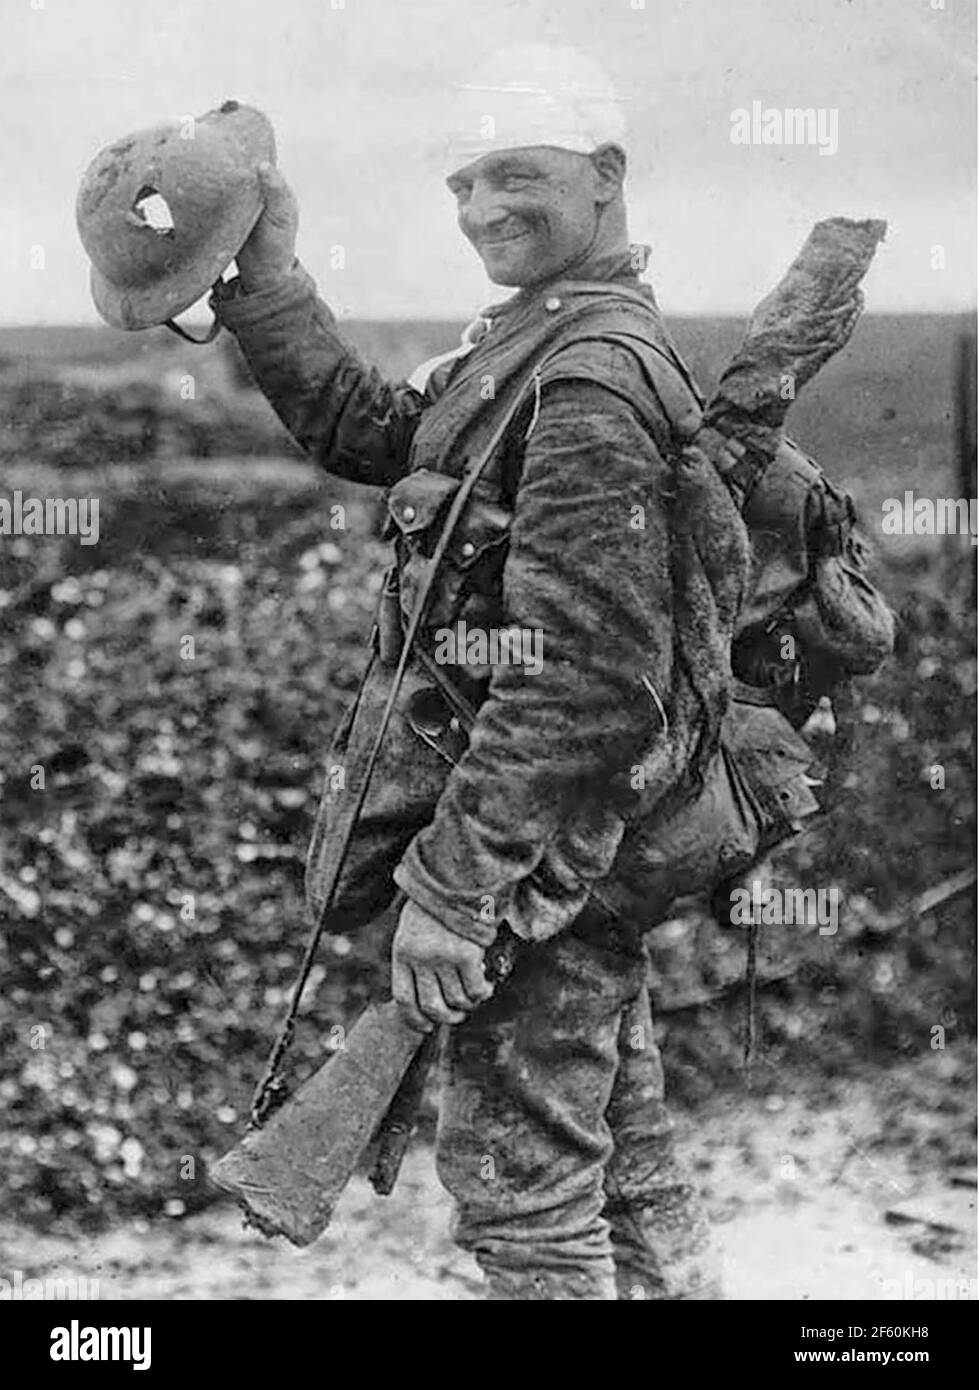 BRITISH SOLDIER shows of his damaged helmet in 1917. No other information found for this iconic photo. Stock Photo